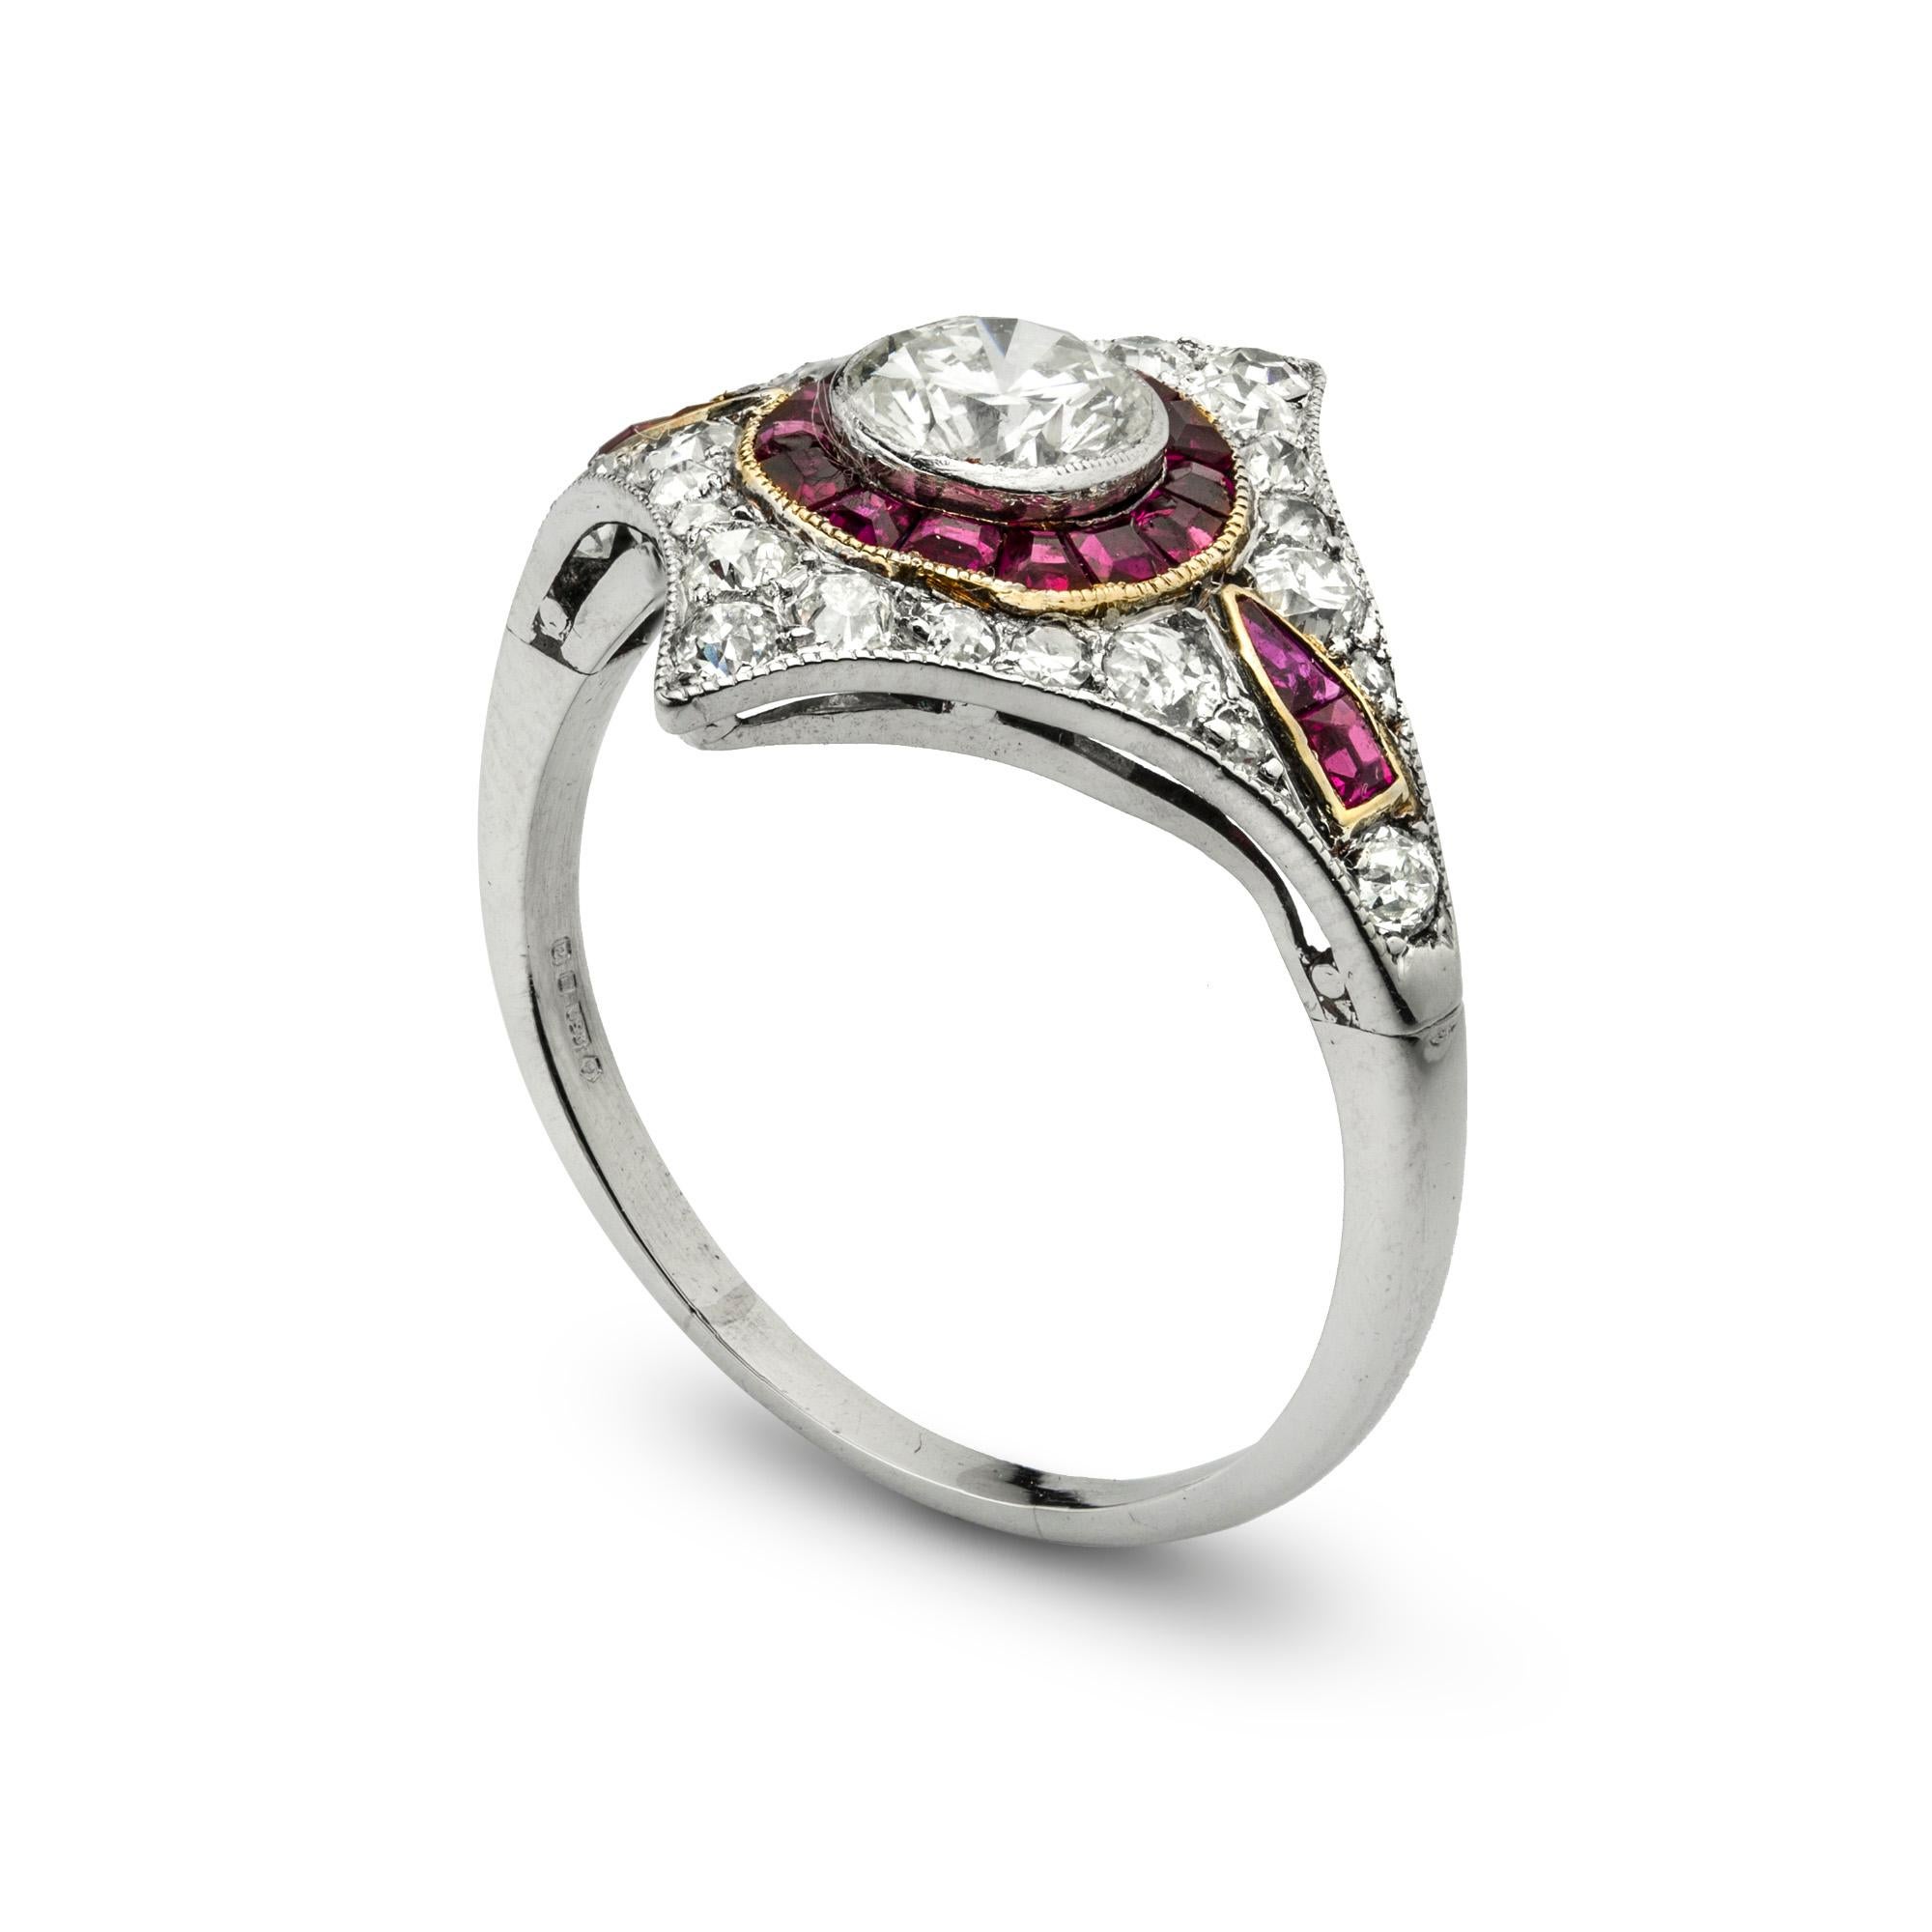 A ruby and diamond ring, the central round brilliant-cut diamond estimated to weigh 0.55 carats millegrain-set within a circle of calibré-cut rubies to a kite shape surround of pave-set old-cut diamonds estimated to weigh a further total of 0.6